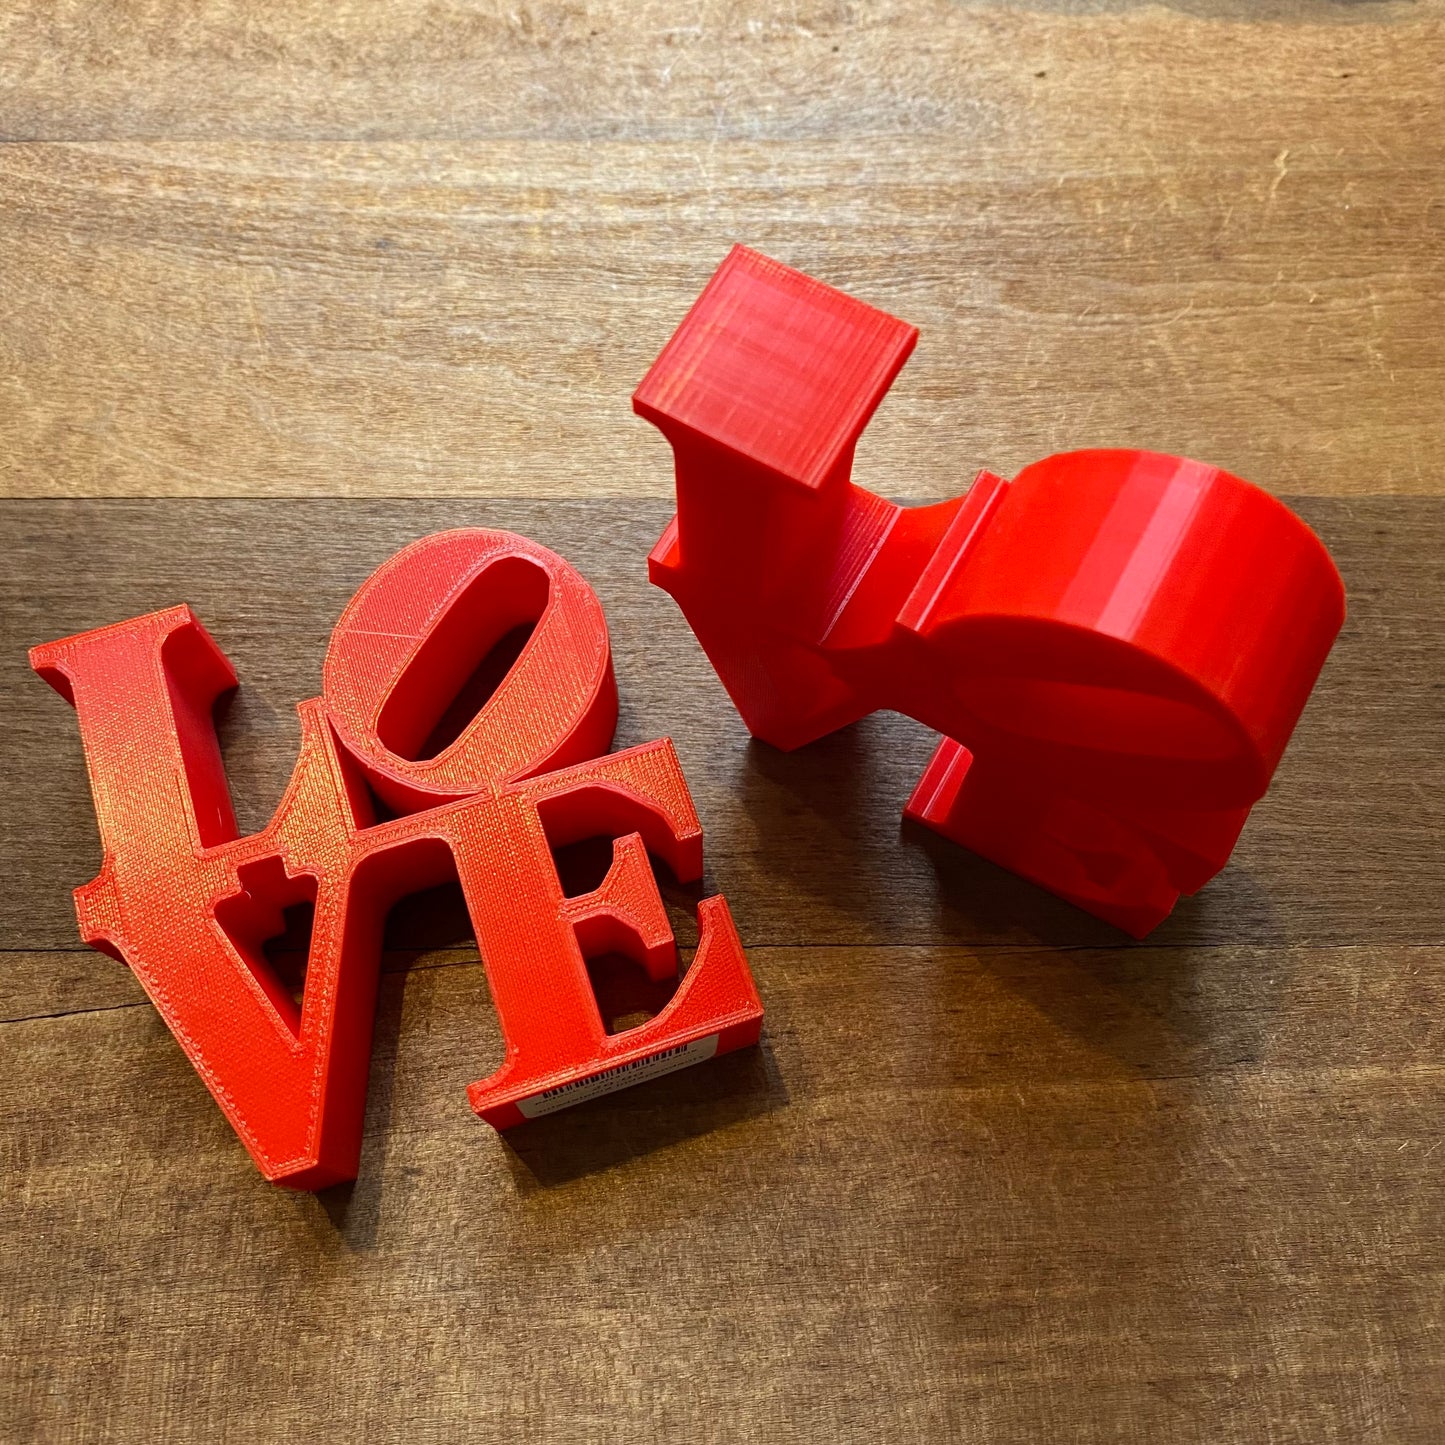 Red Rosewood Home LOVE Statue replicas on a wooden surface.